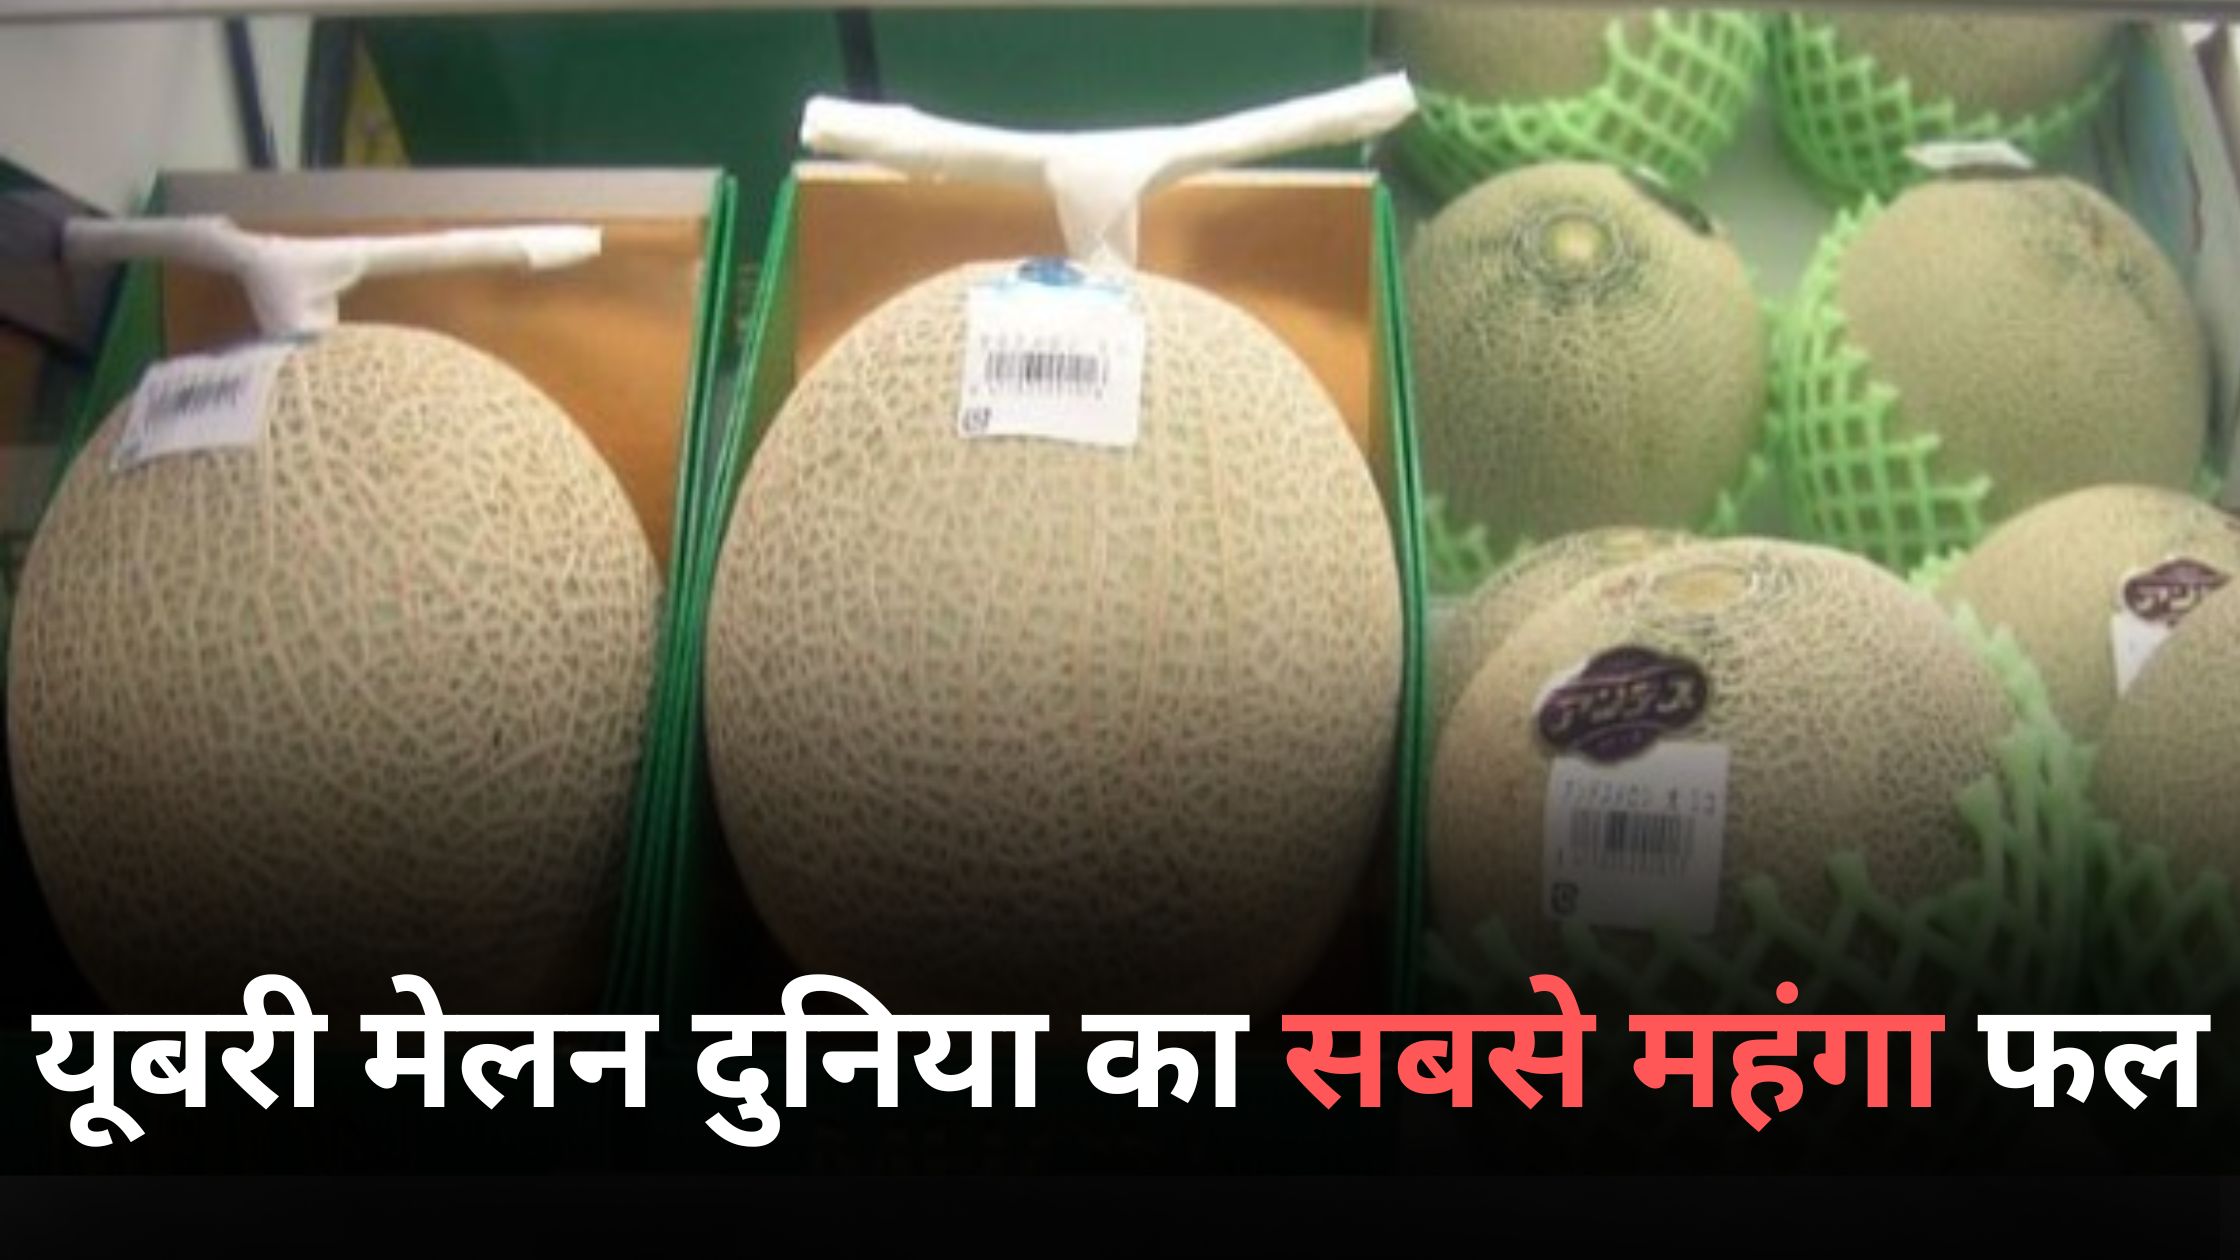 Yubari Melon is the most expensive fruit in the world